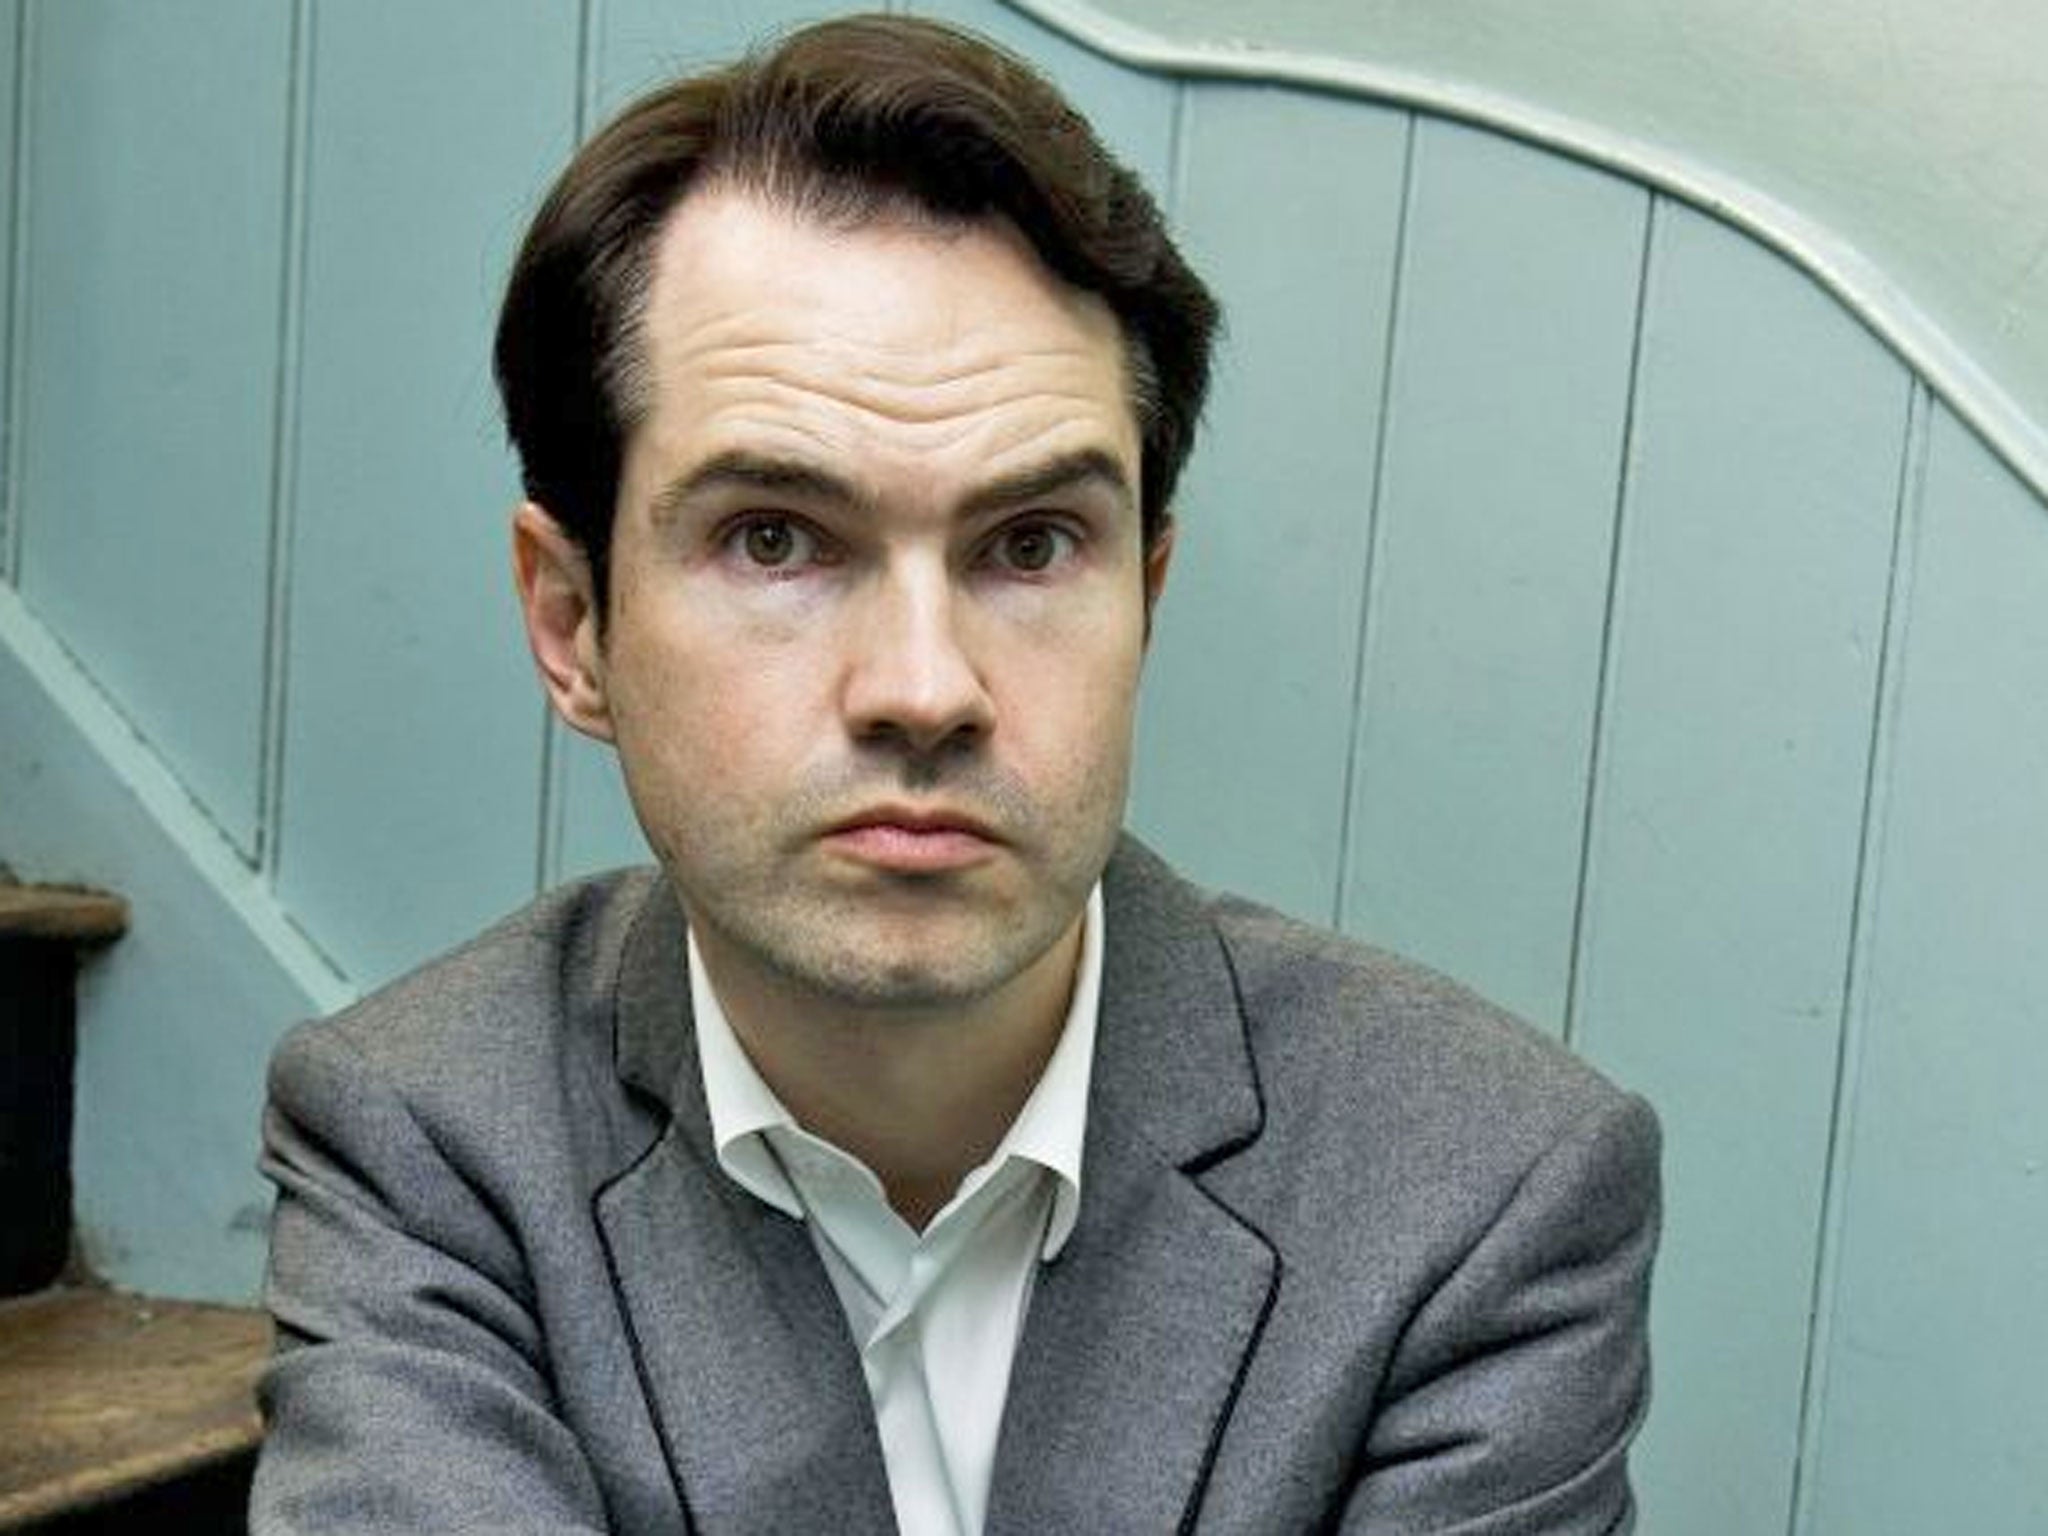 Comedian Jimmy Carr told the BBC’s ‘Desert Island Discs’ that he thought depression an over-used term